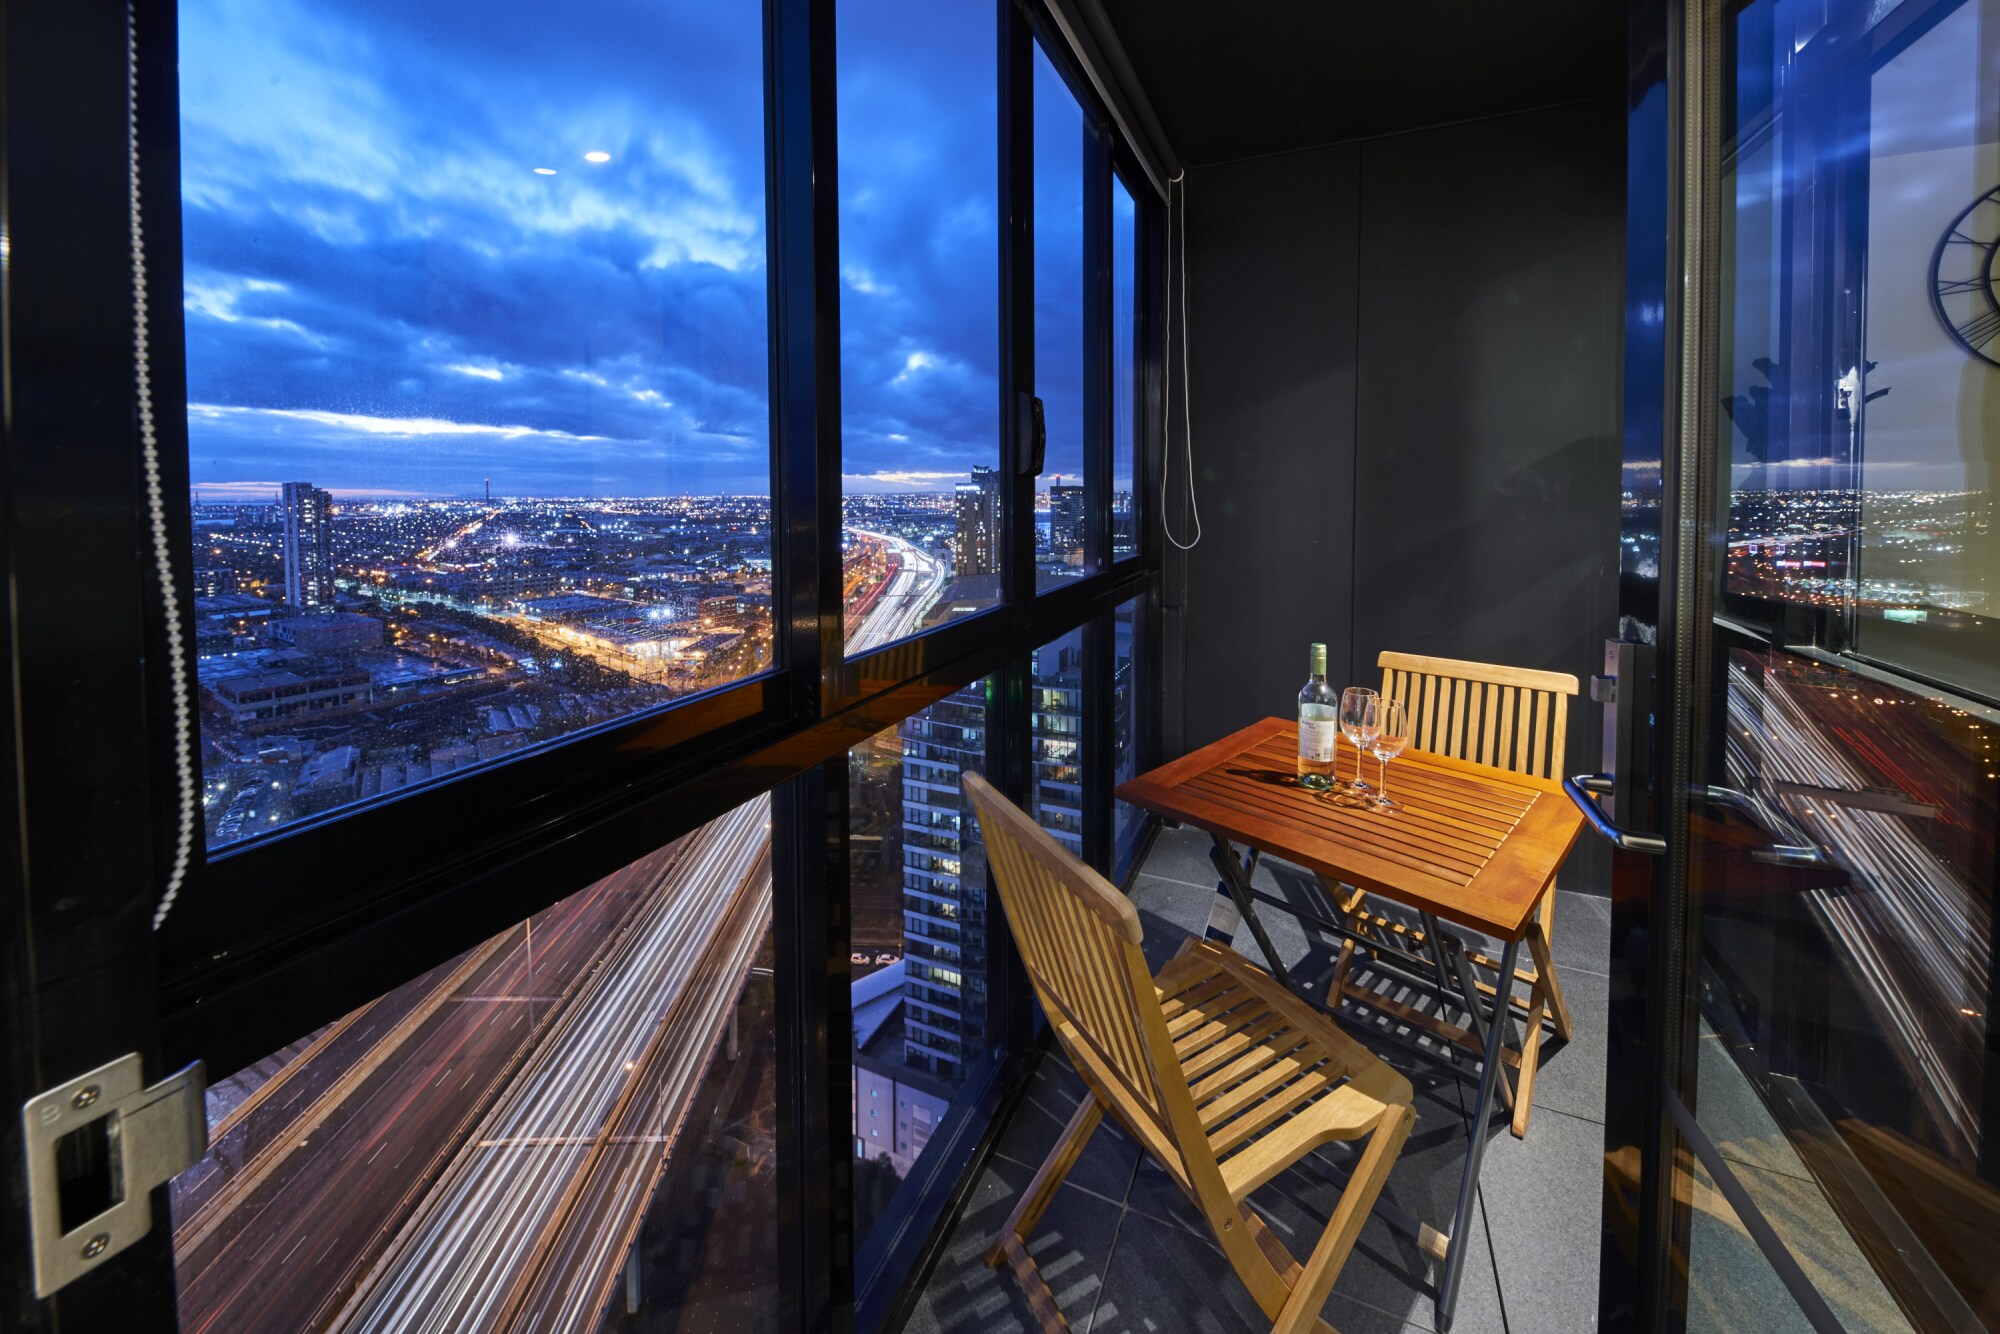 Dine with a wonderful view from your internal balcony!